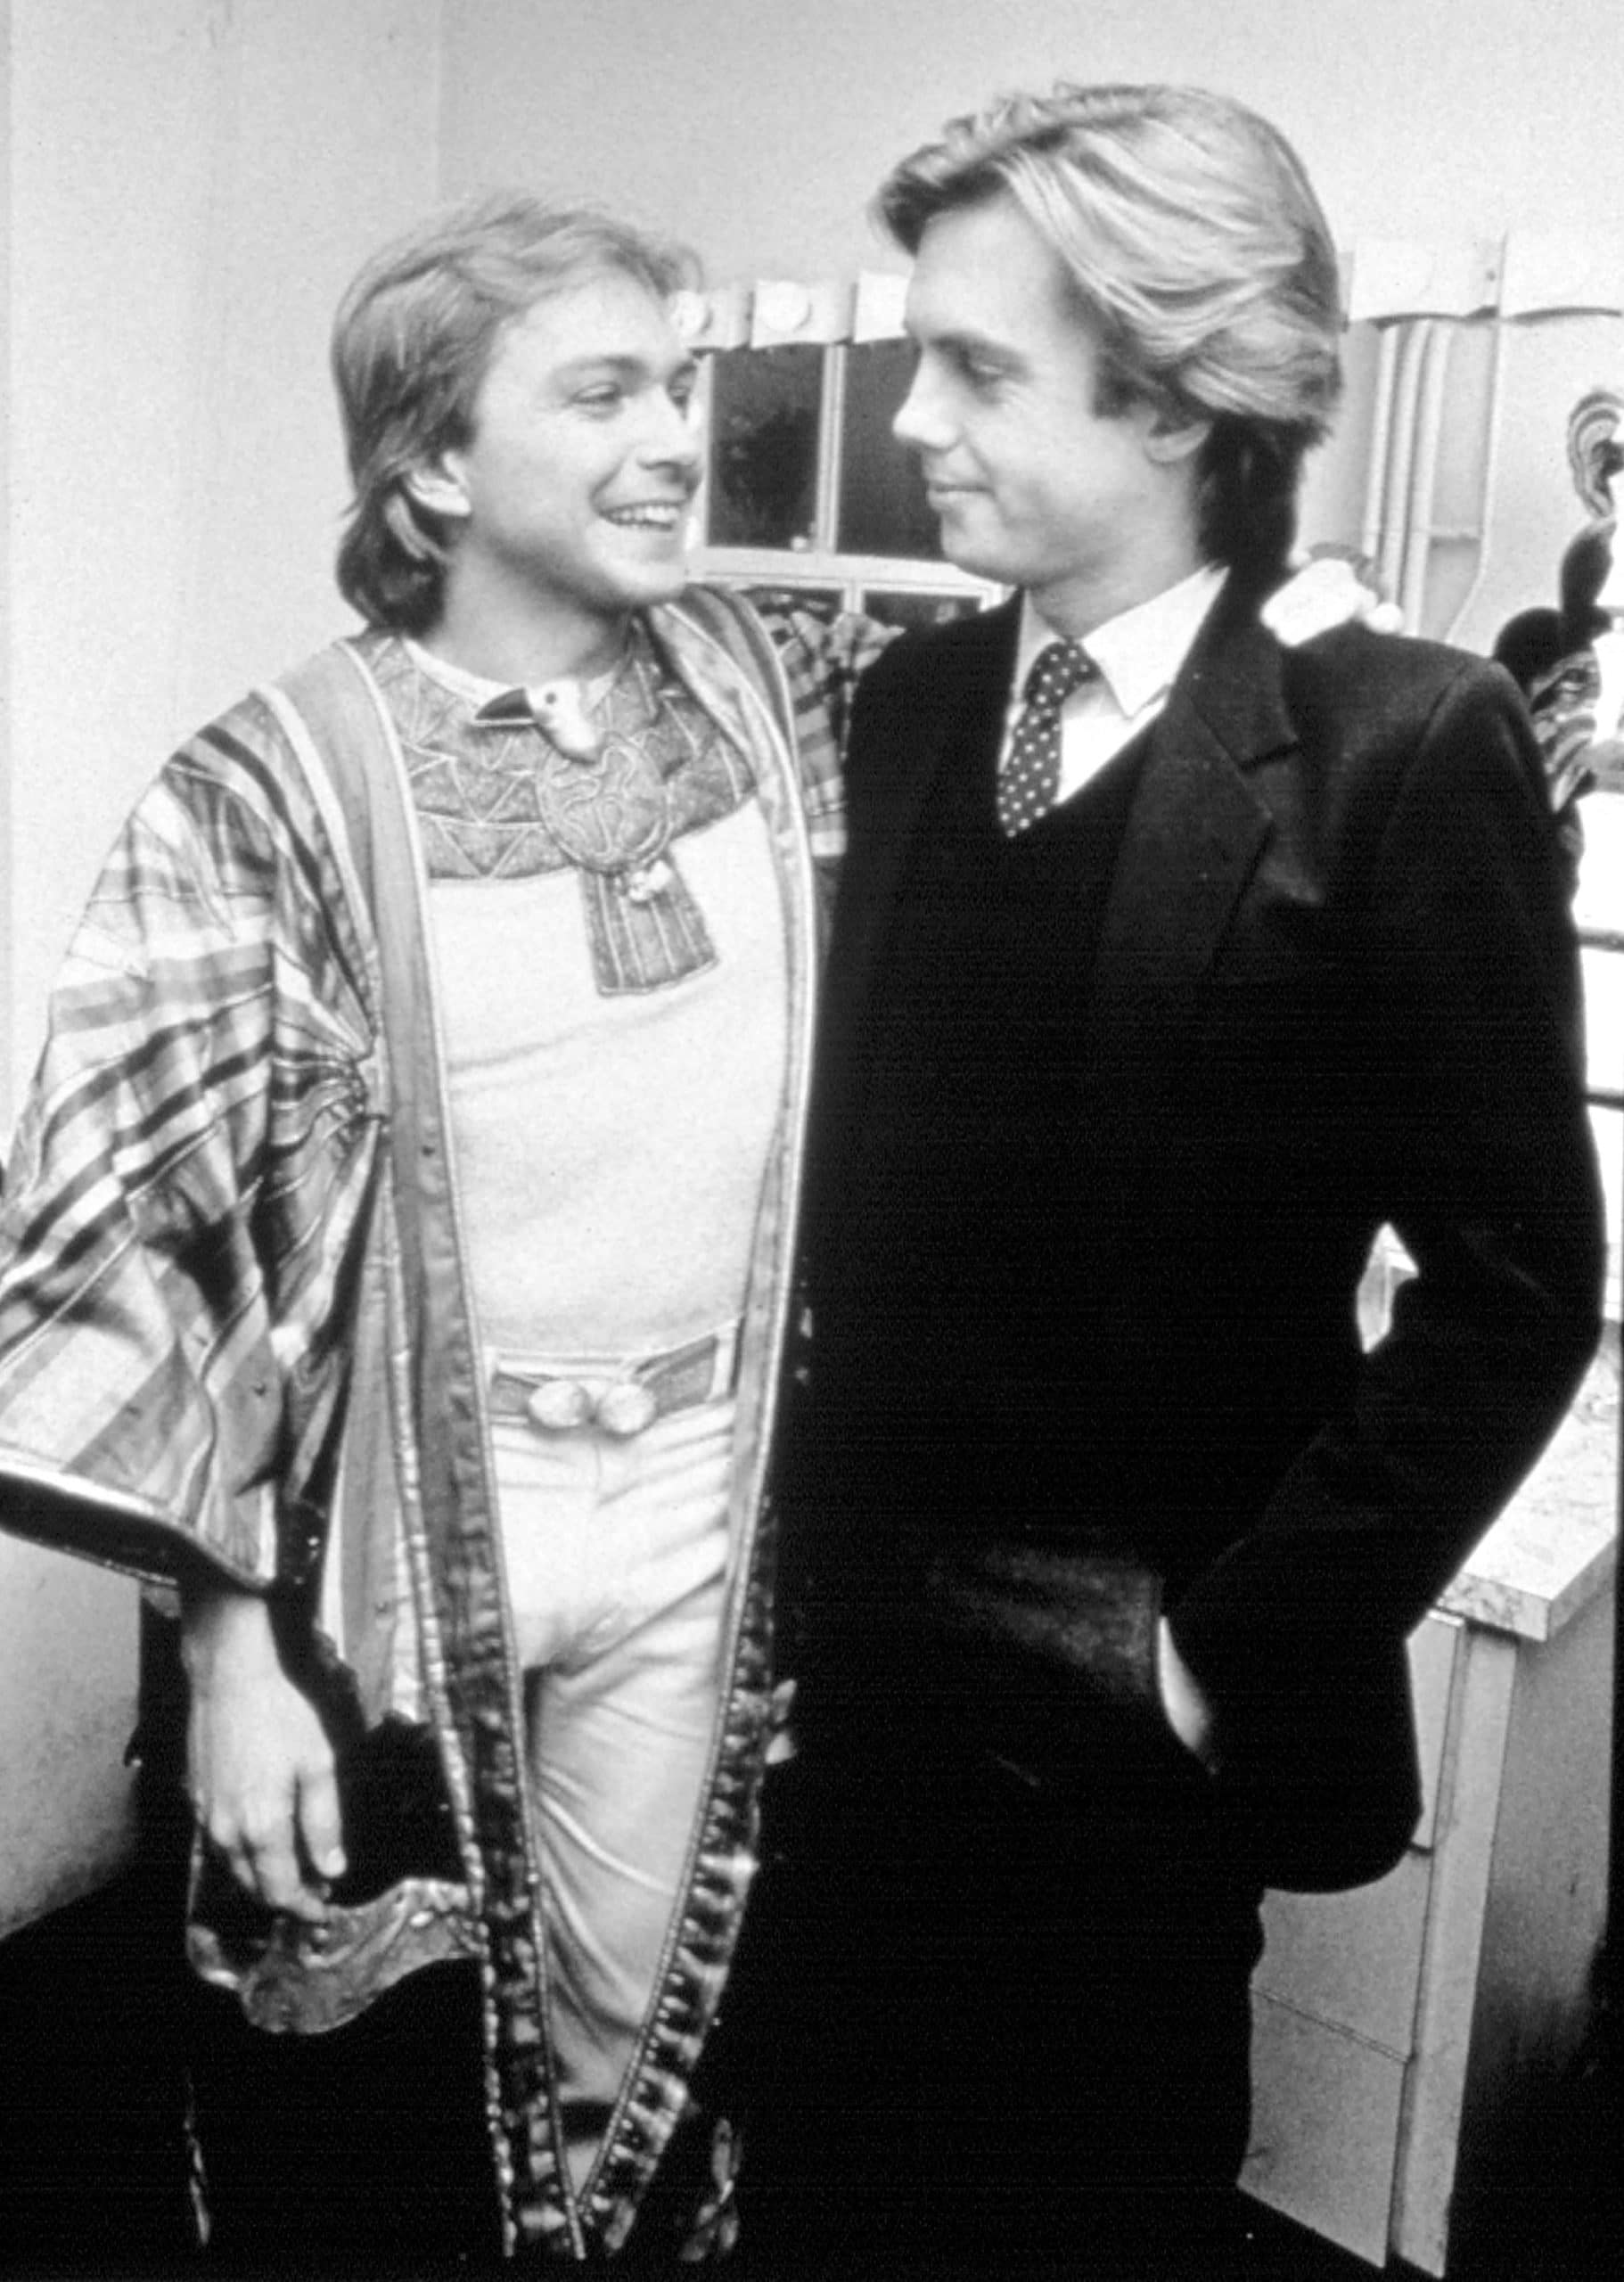 DAVID &amp; SHAUN CASSIDY, Shaun visits after David's performance in Joseph And The Amazing Technicolor Dreamcoat, March-Sept, 1983